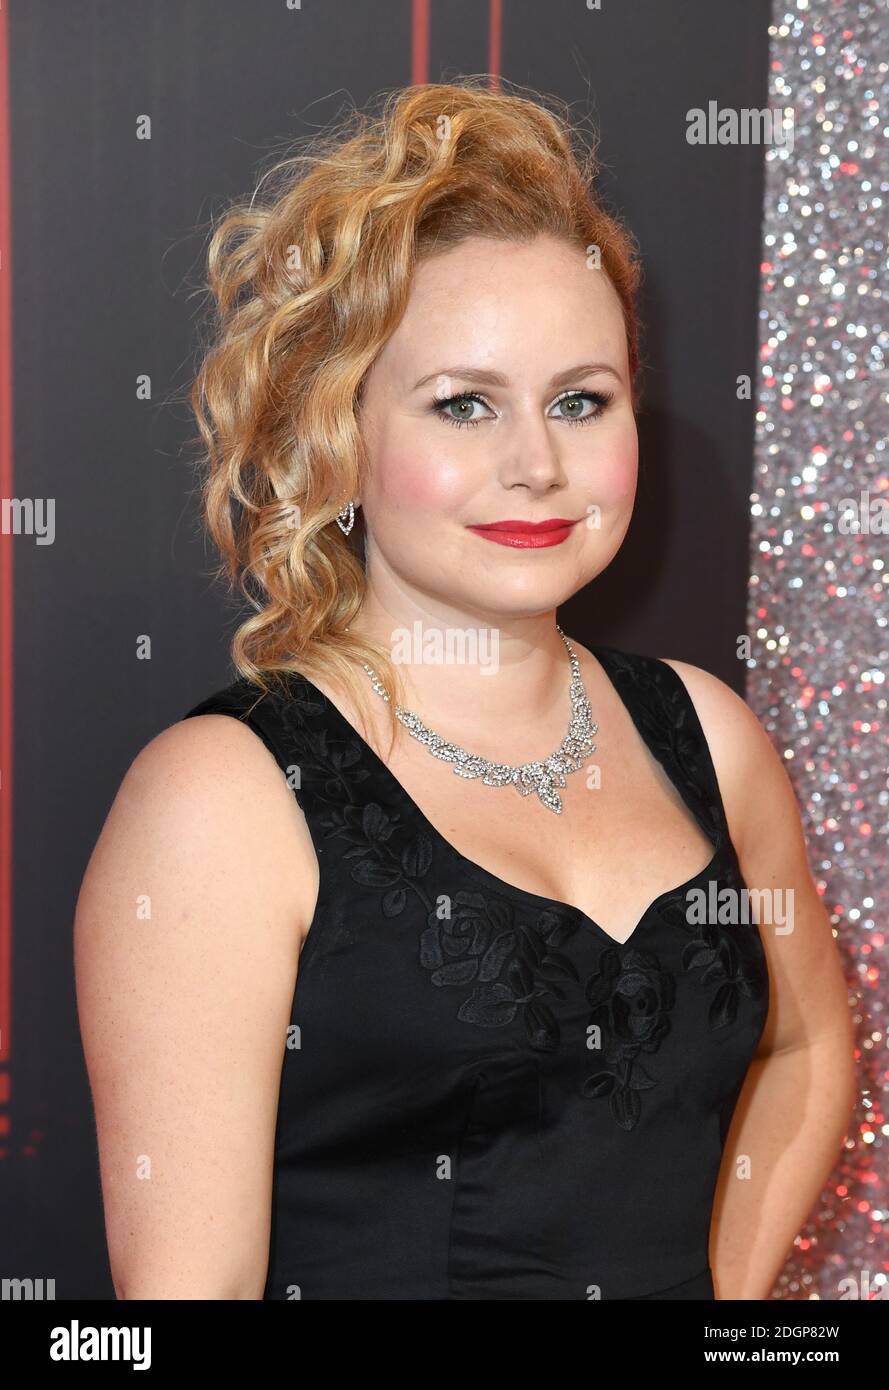 Dolly-Rose Campbell attending the British Soap Awards 2017, held at the Lowry Theatre, in Salford, Manchester. Photo Copyright should read Doug Peters/EMPICS Entertainment Stock Photo